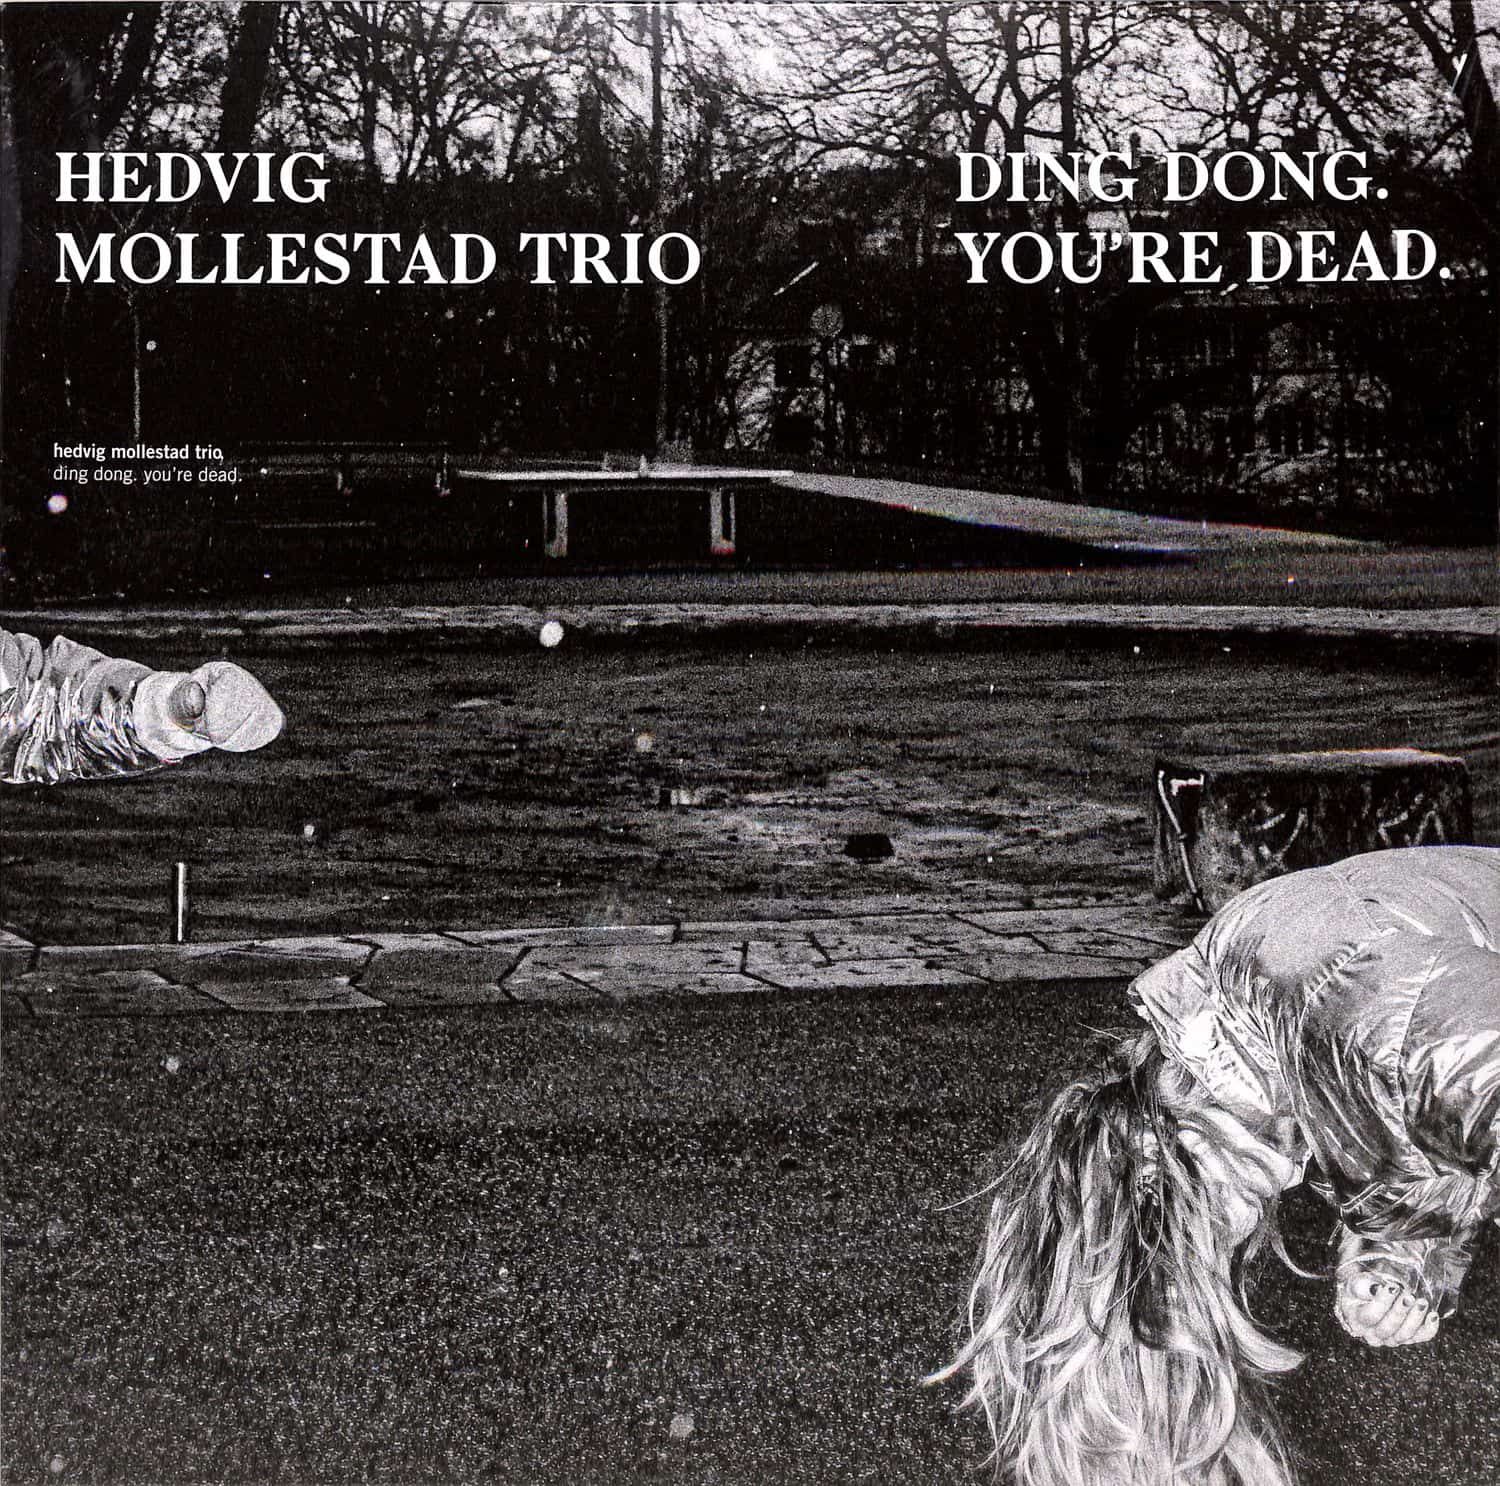 Hedvig Mollestad Trio - DING DONG. YOU RE DEAD 